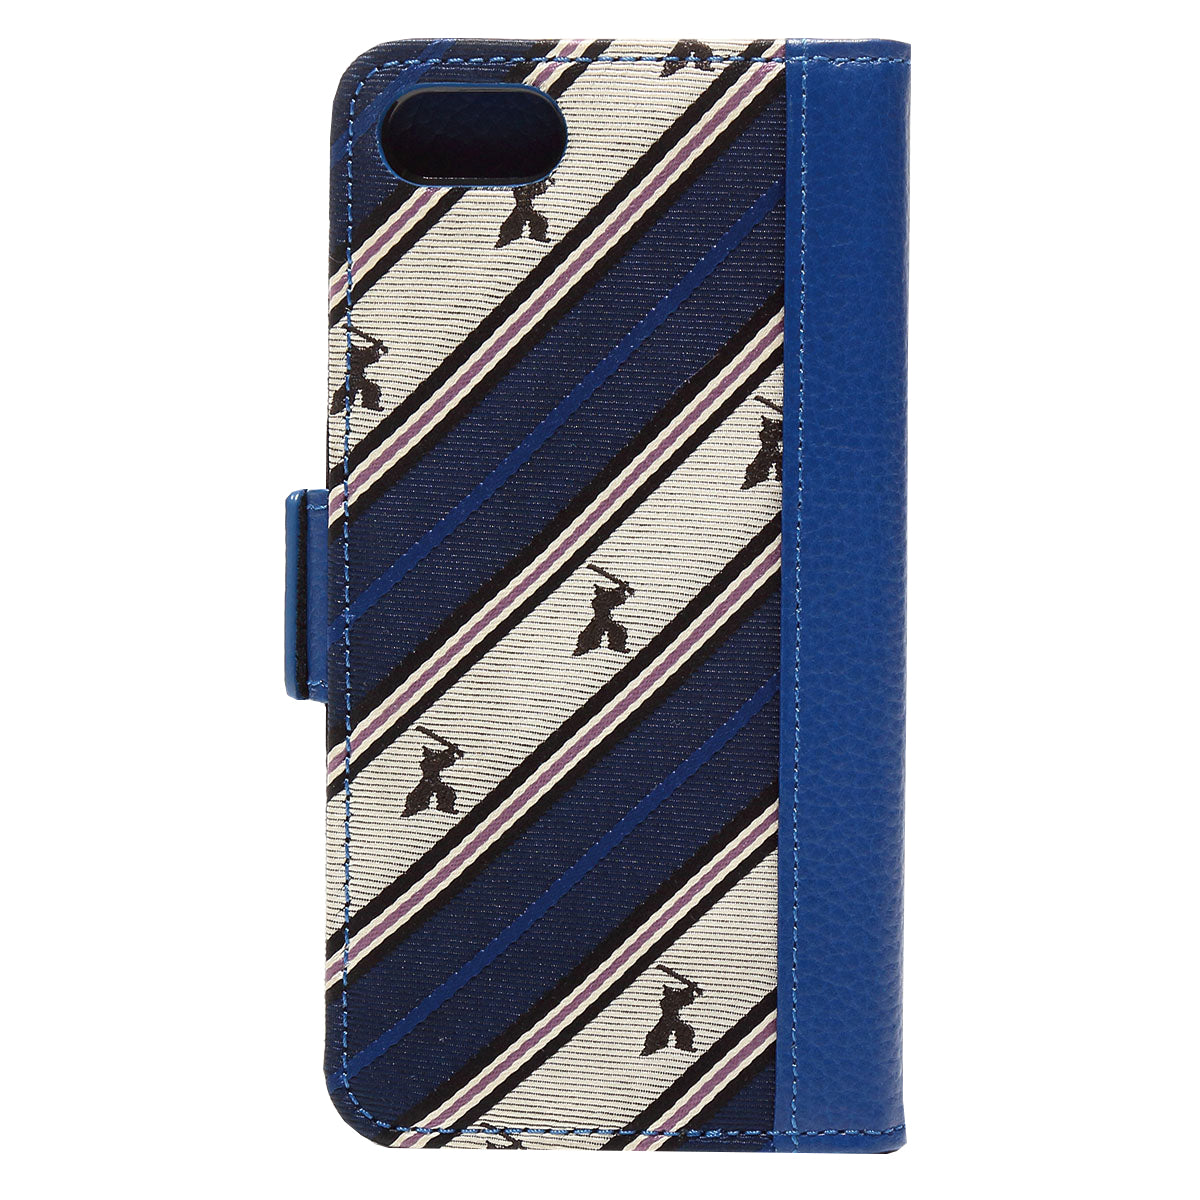 Wallet Case for Apple iPhone 6 7 8 Jacquard Woven Silk & Leather 3 Card Holder Made in Japan FORTUNA Tokyo